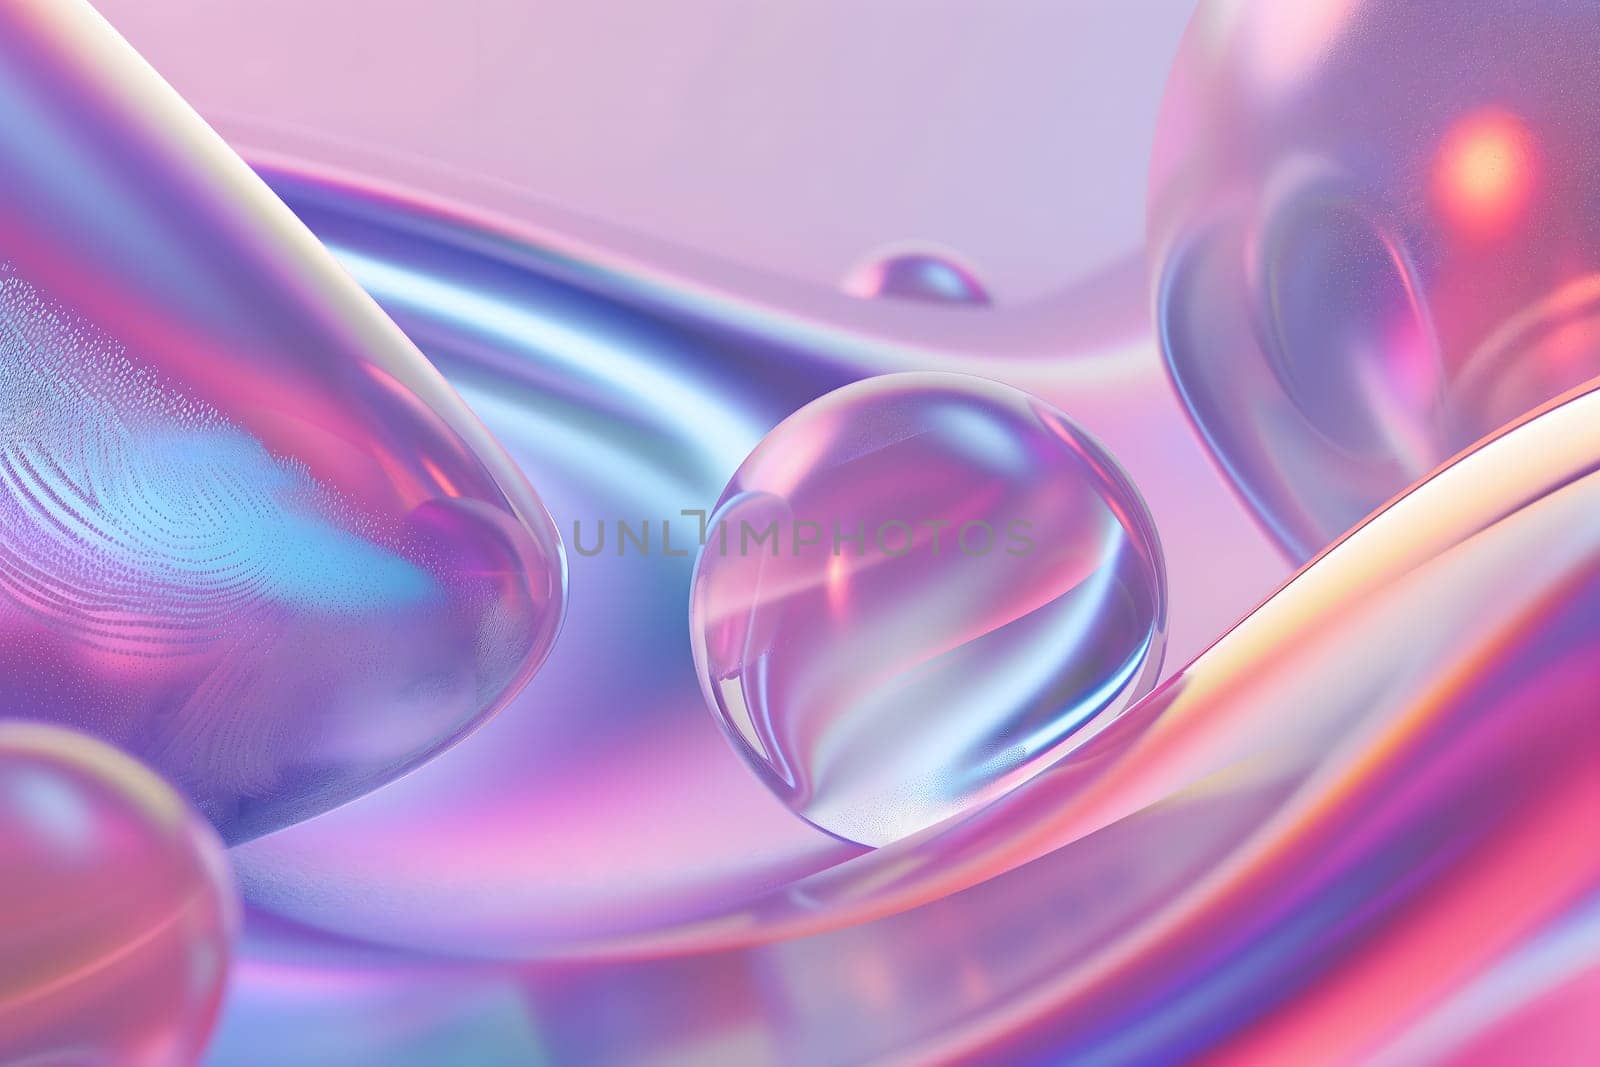 Colorful bright dreamy holo glass bubbles and waves background and wallpaper. Neural network generated in January 2024. Not based on any actual scene or pattern.